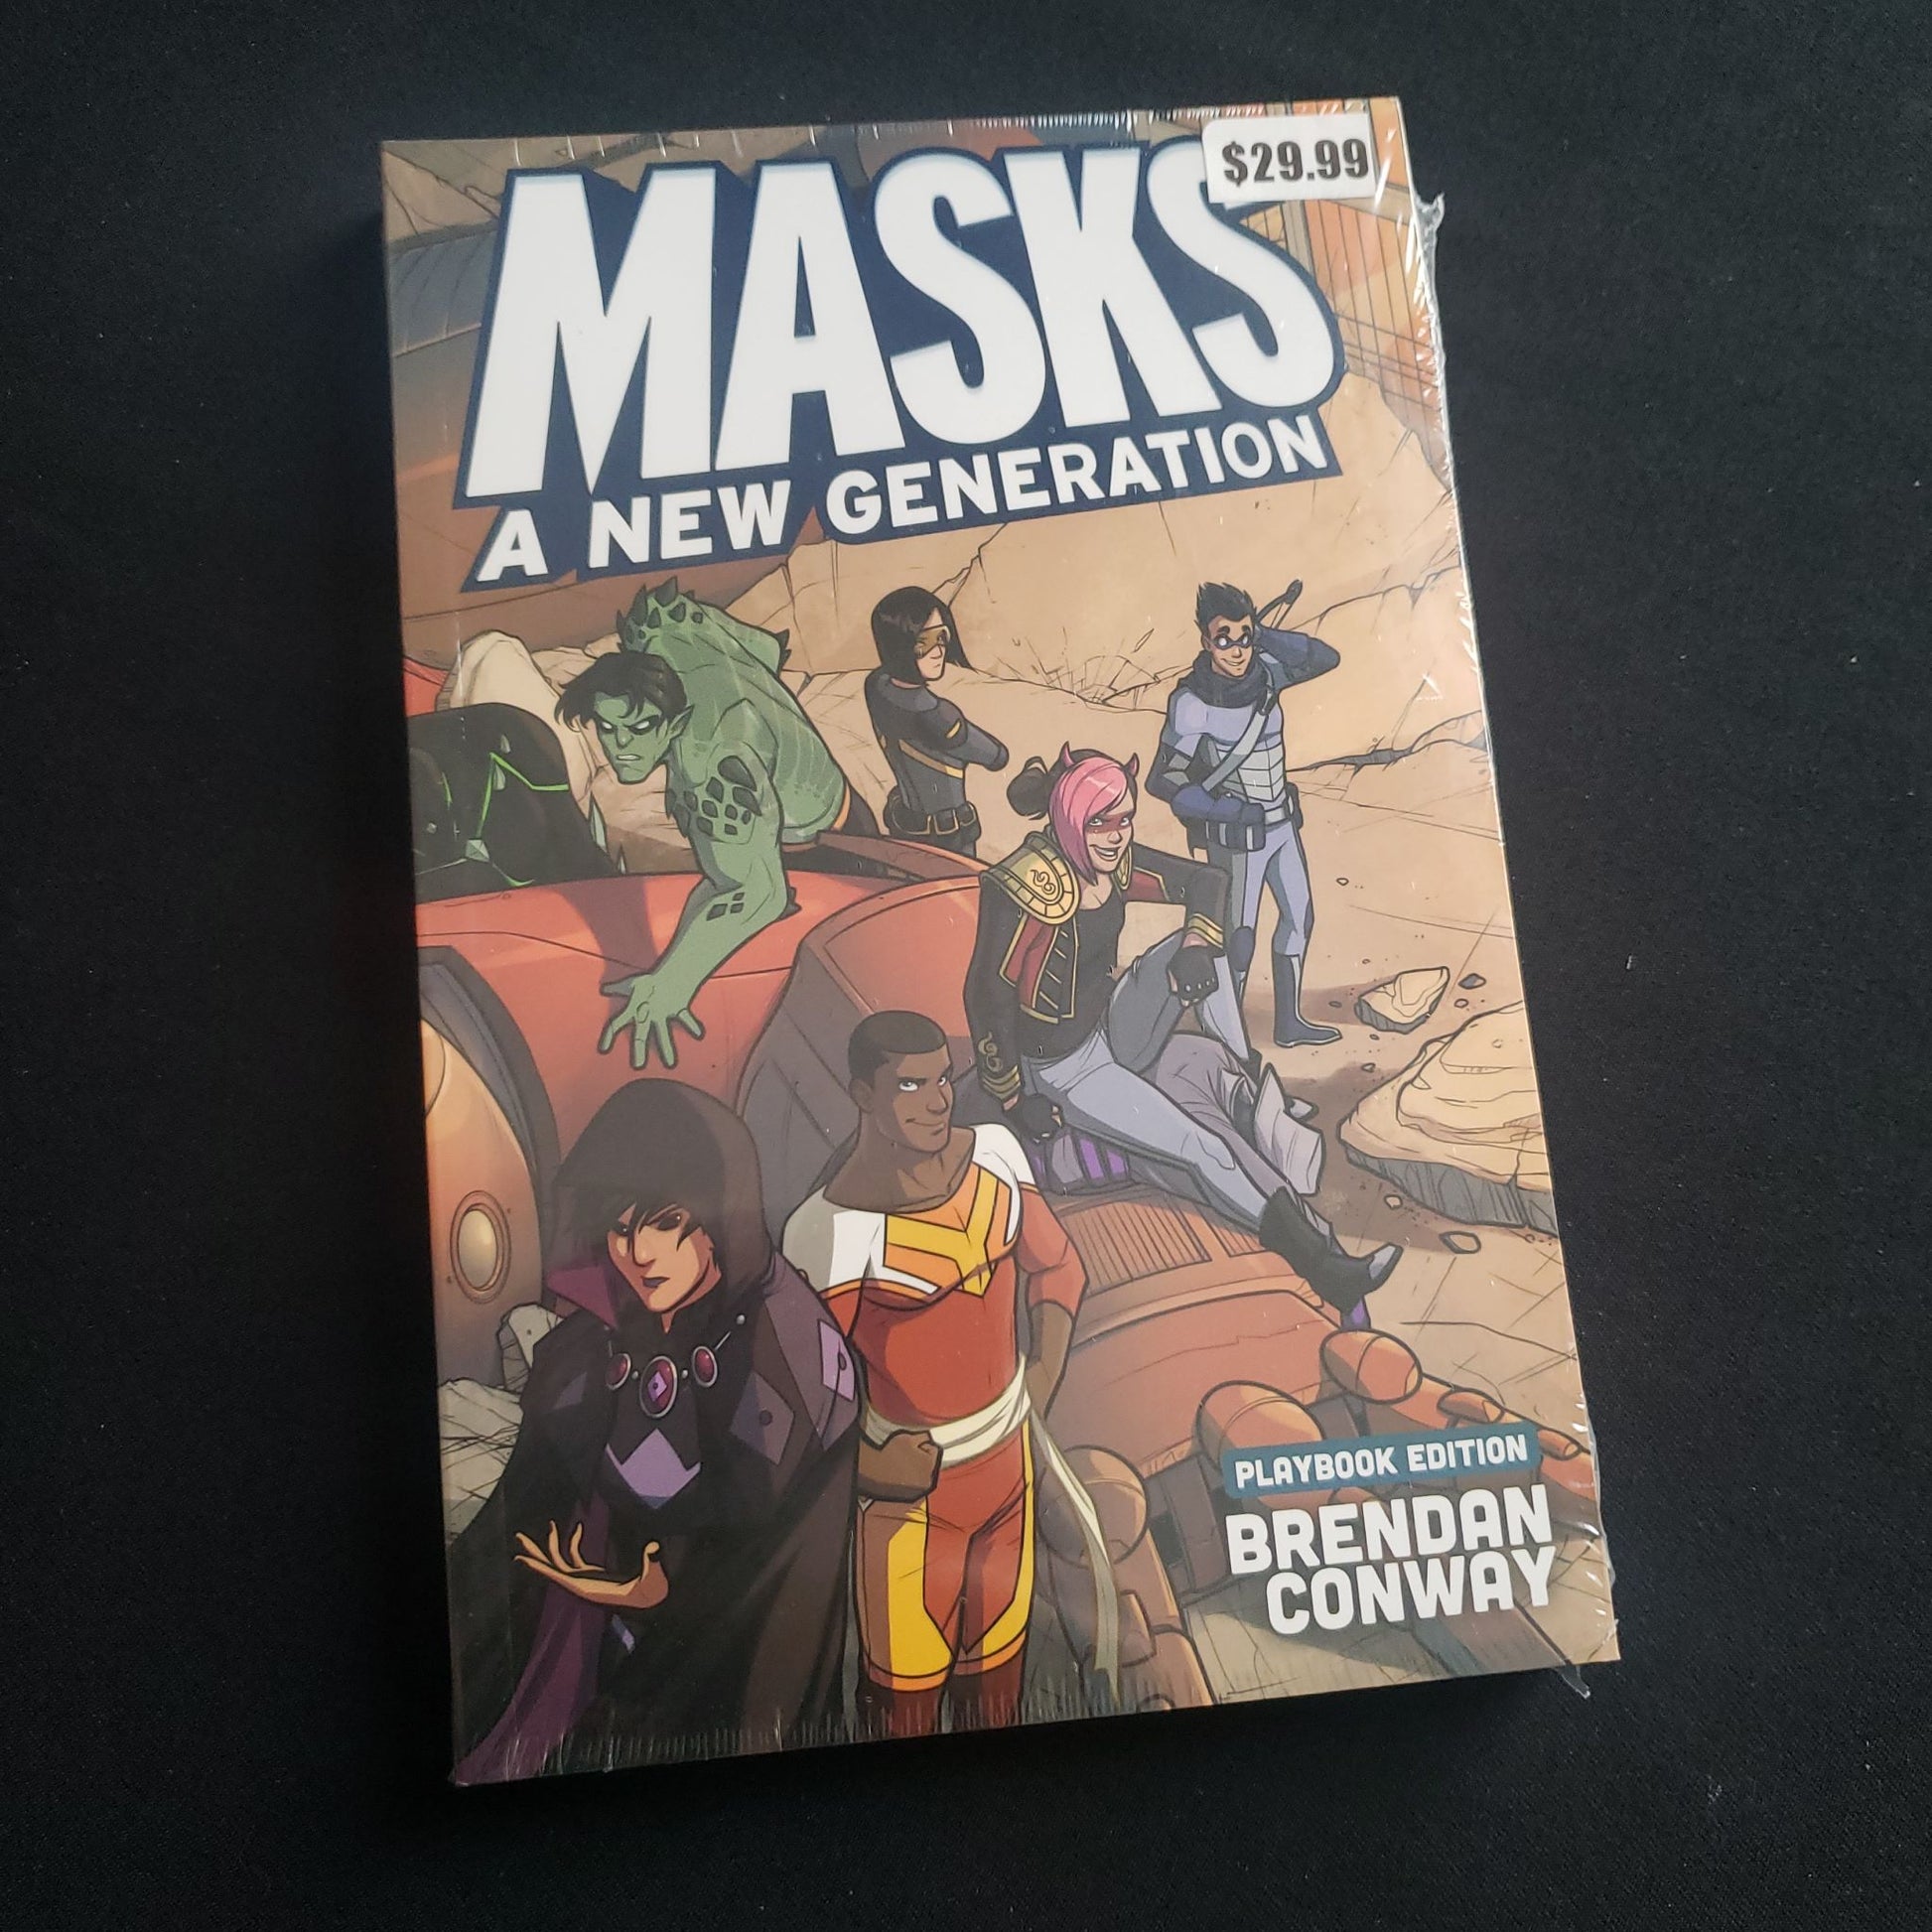 Masks: A New Generation RPG book - front cover of book